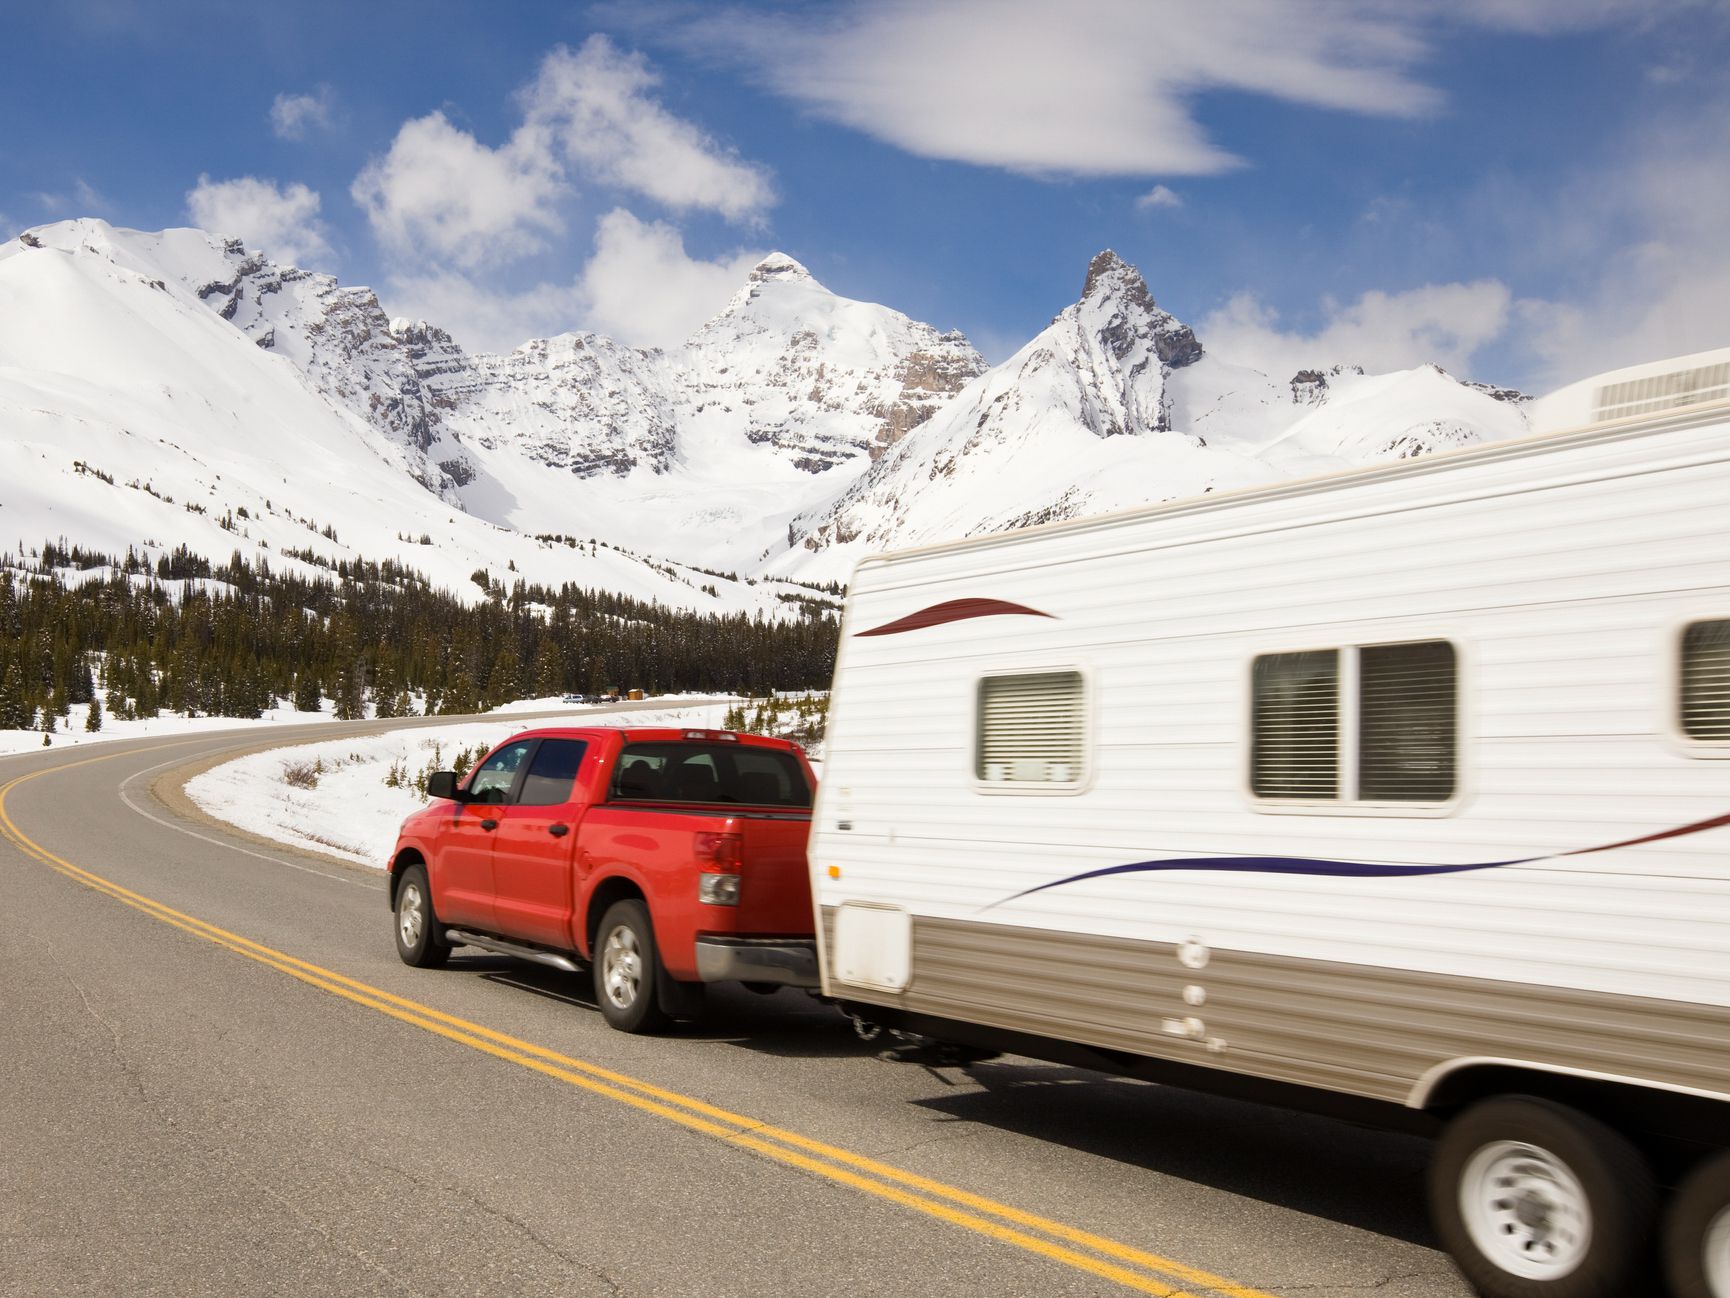 <p>These smaller but still roomy campers attach to the vehicles that pull them via standard bumper hitches. Their versatility and accessibility makes them among the most popular RVs on the road. They are the ultimate compromise RVs in terms of function, comfort, utility, and cost.</p>